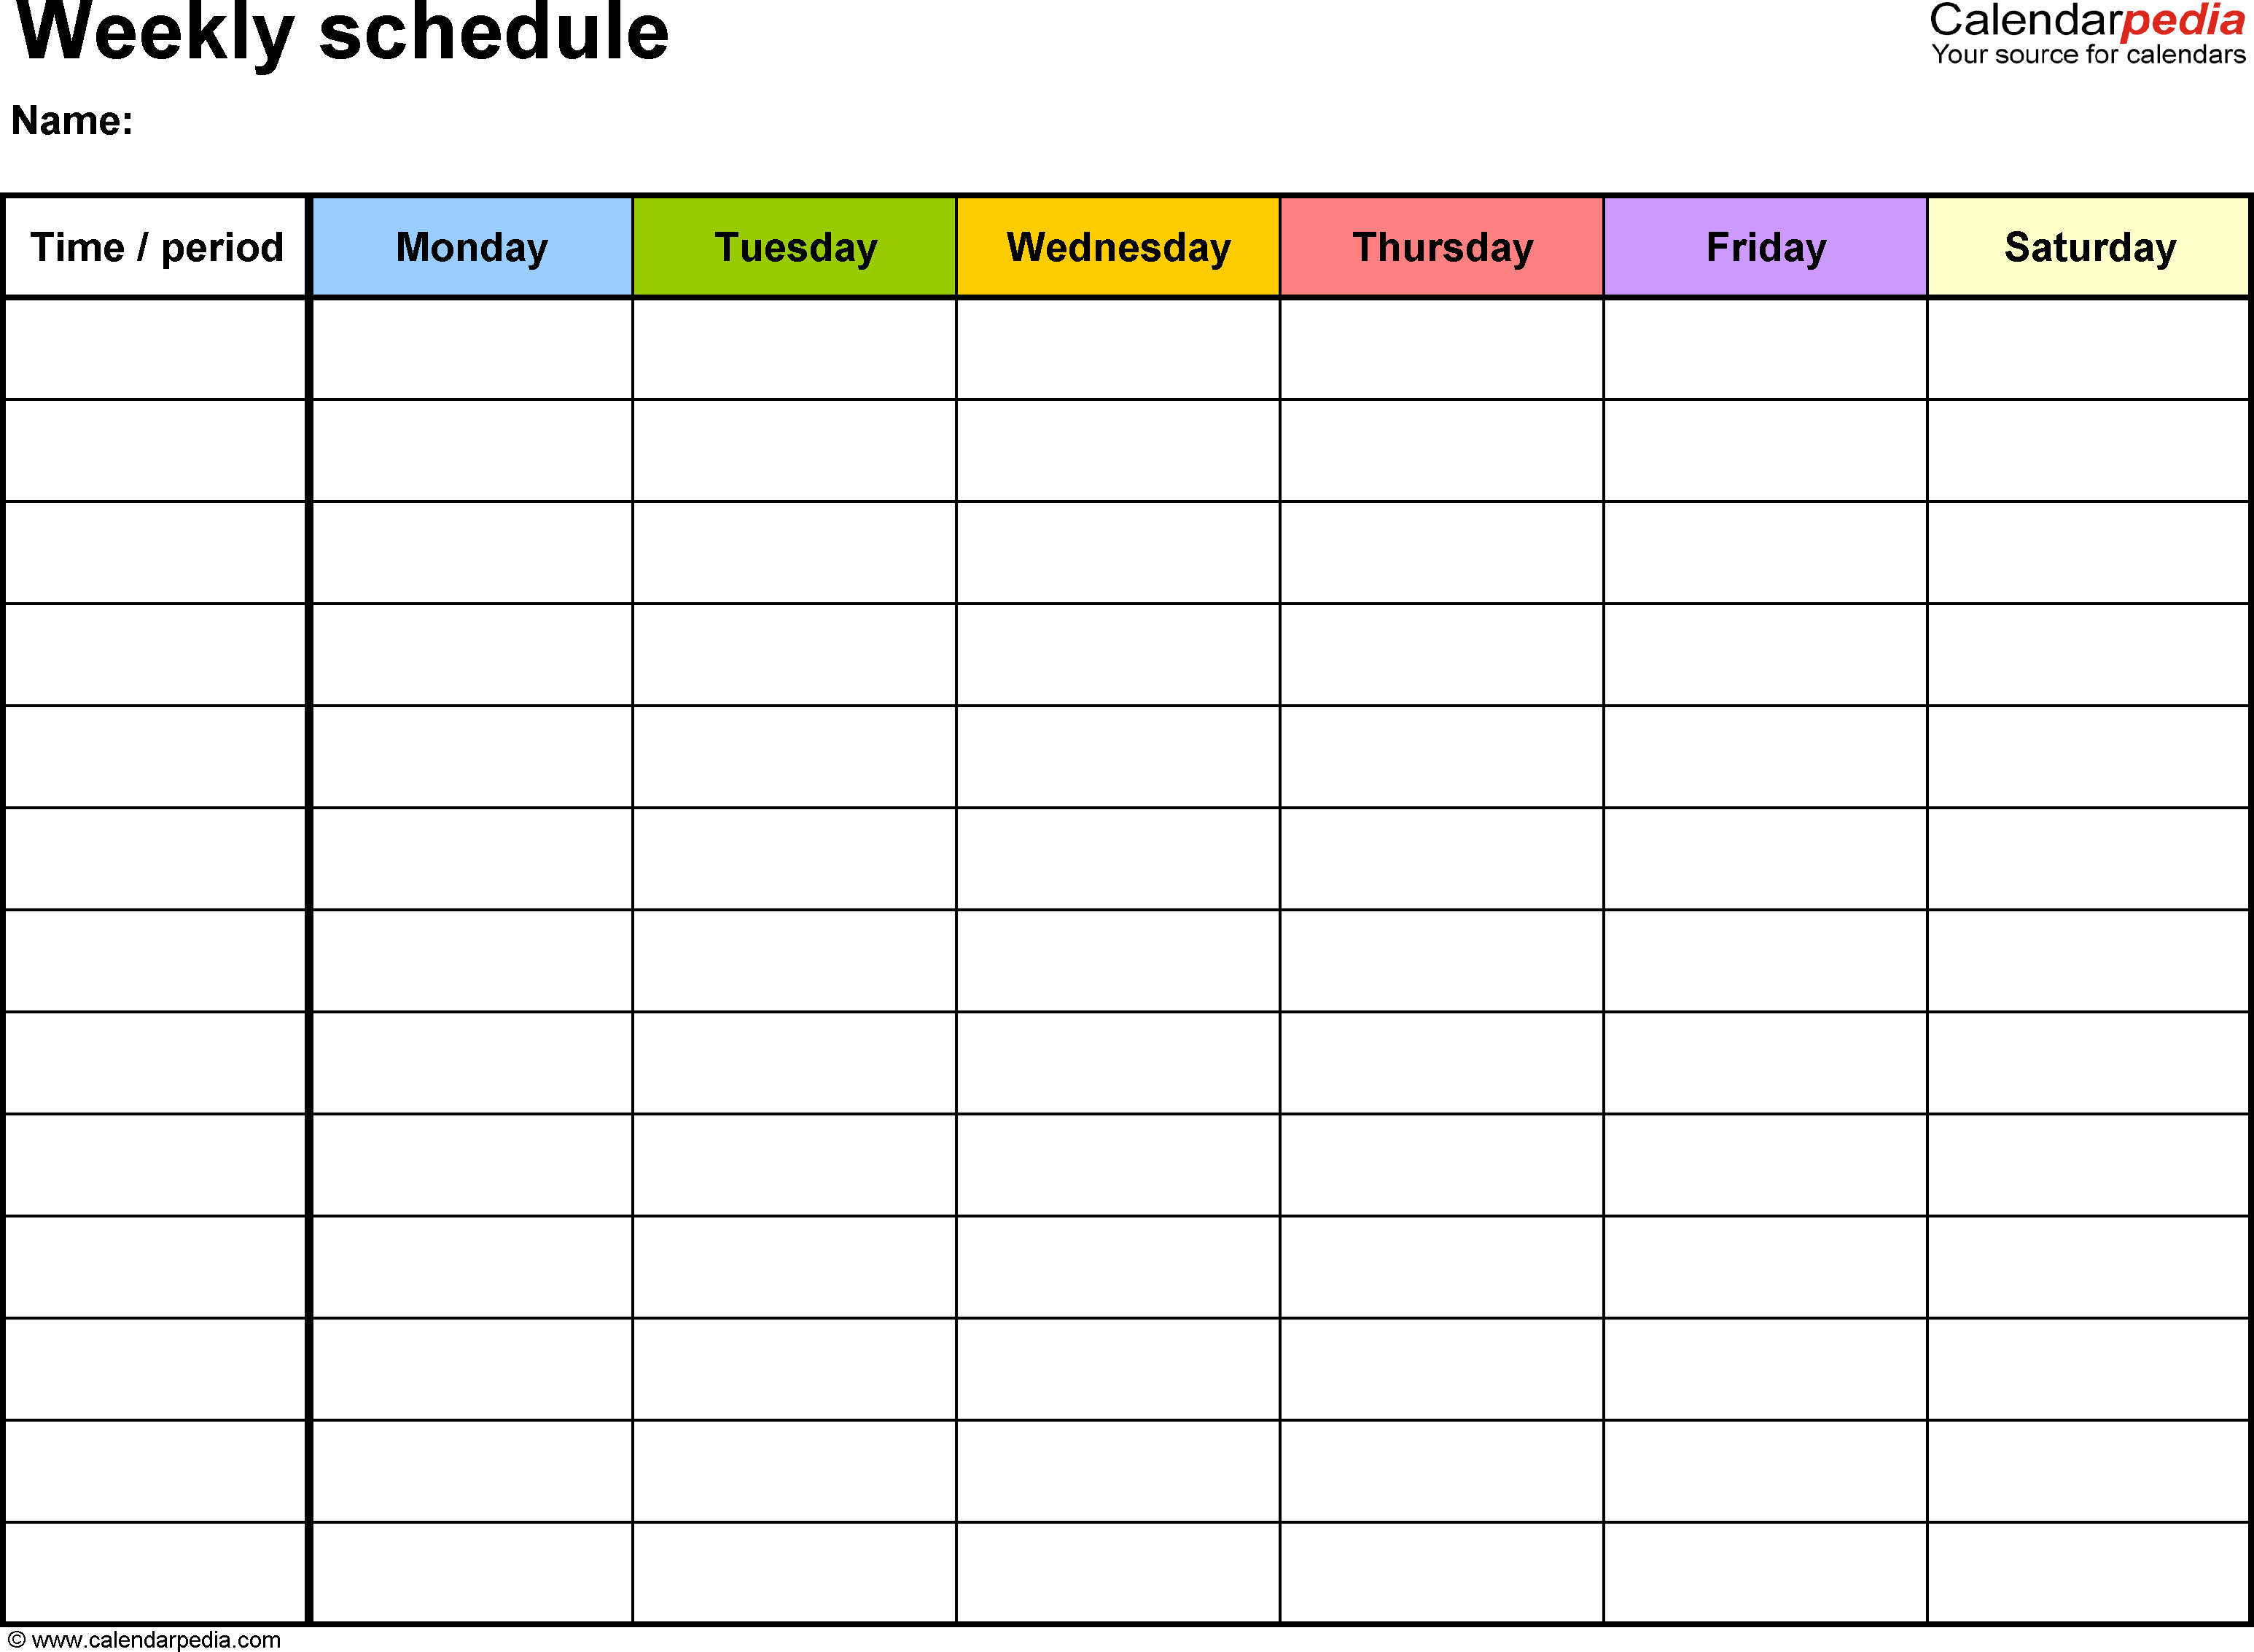 Weekly+Schedule+Template | Weekly Calendar Template for Calendar With Time Slots Printable